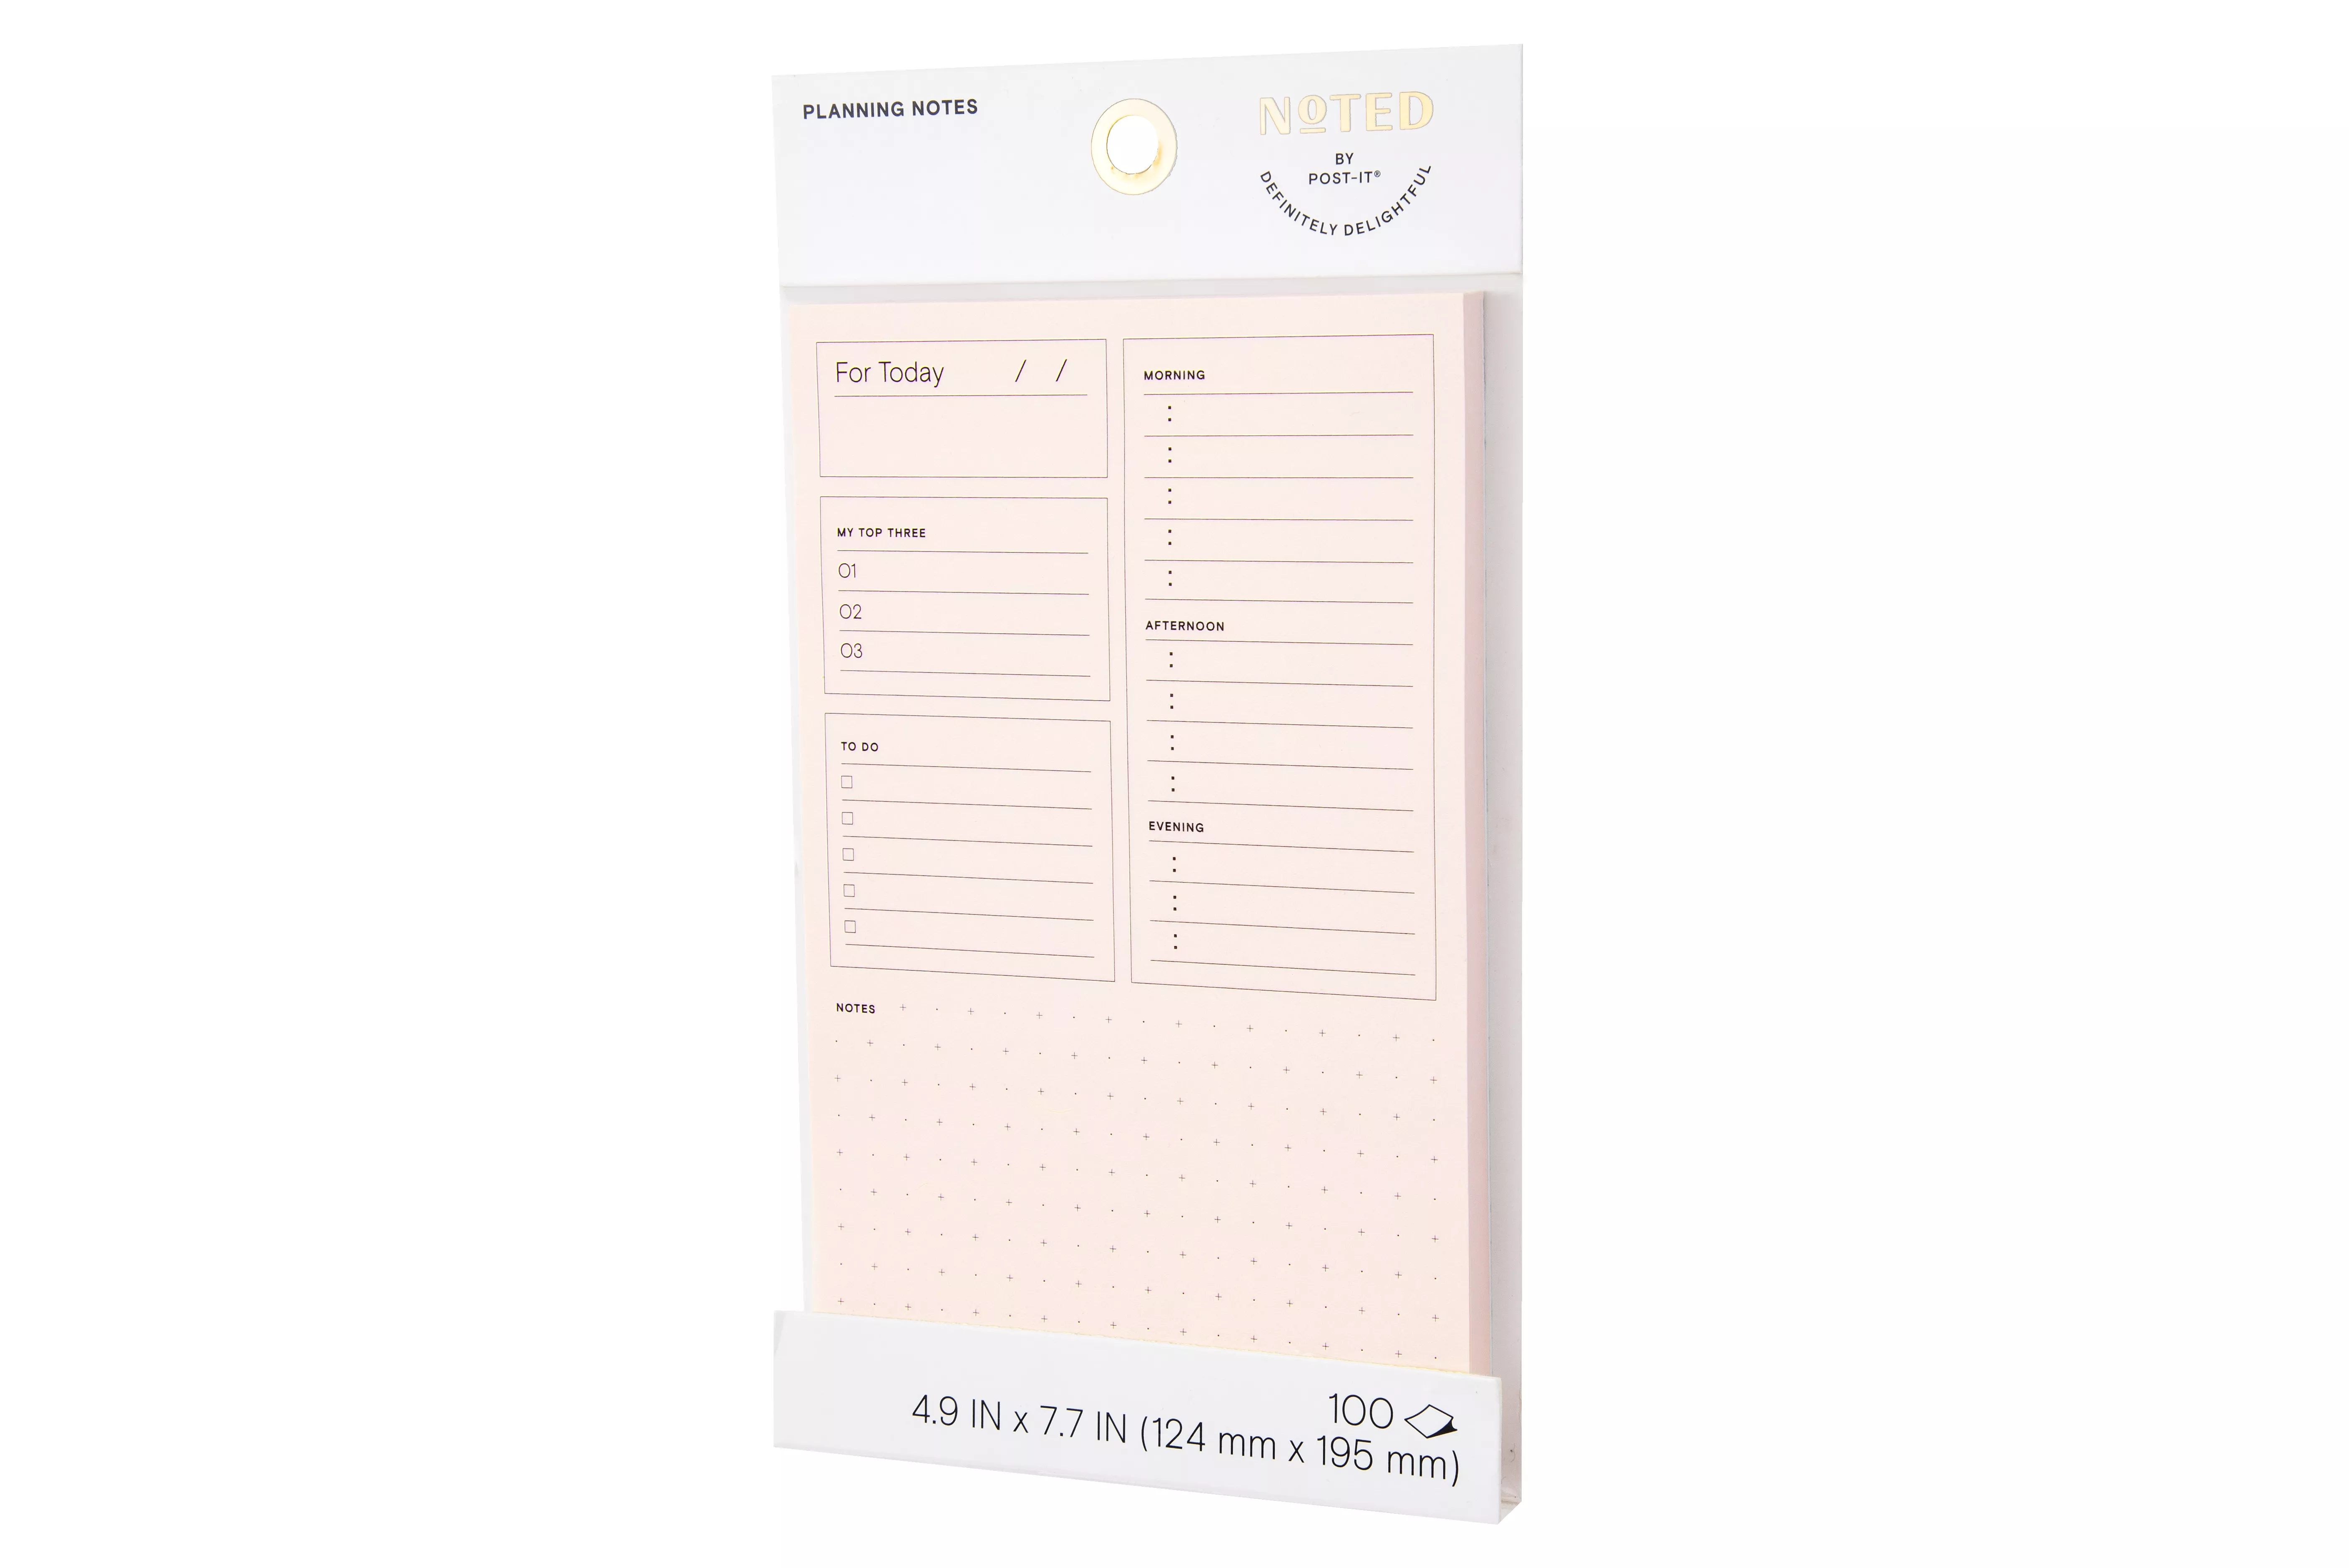 Product Number NTD8-58-1 | Post-it® Planning Notes NTD8-58-1